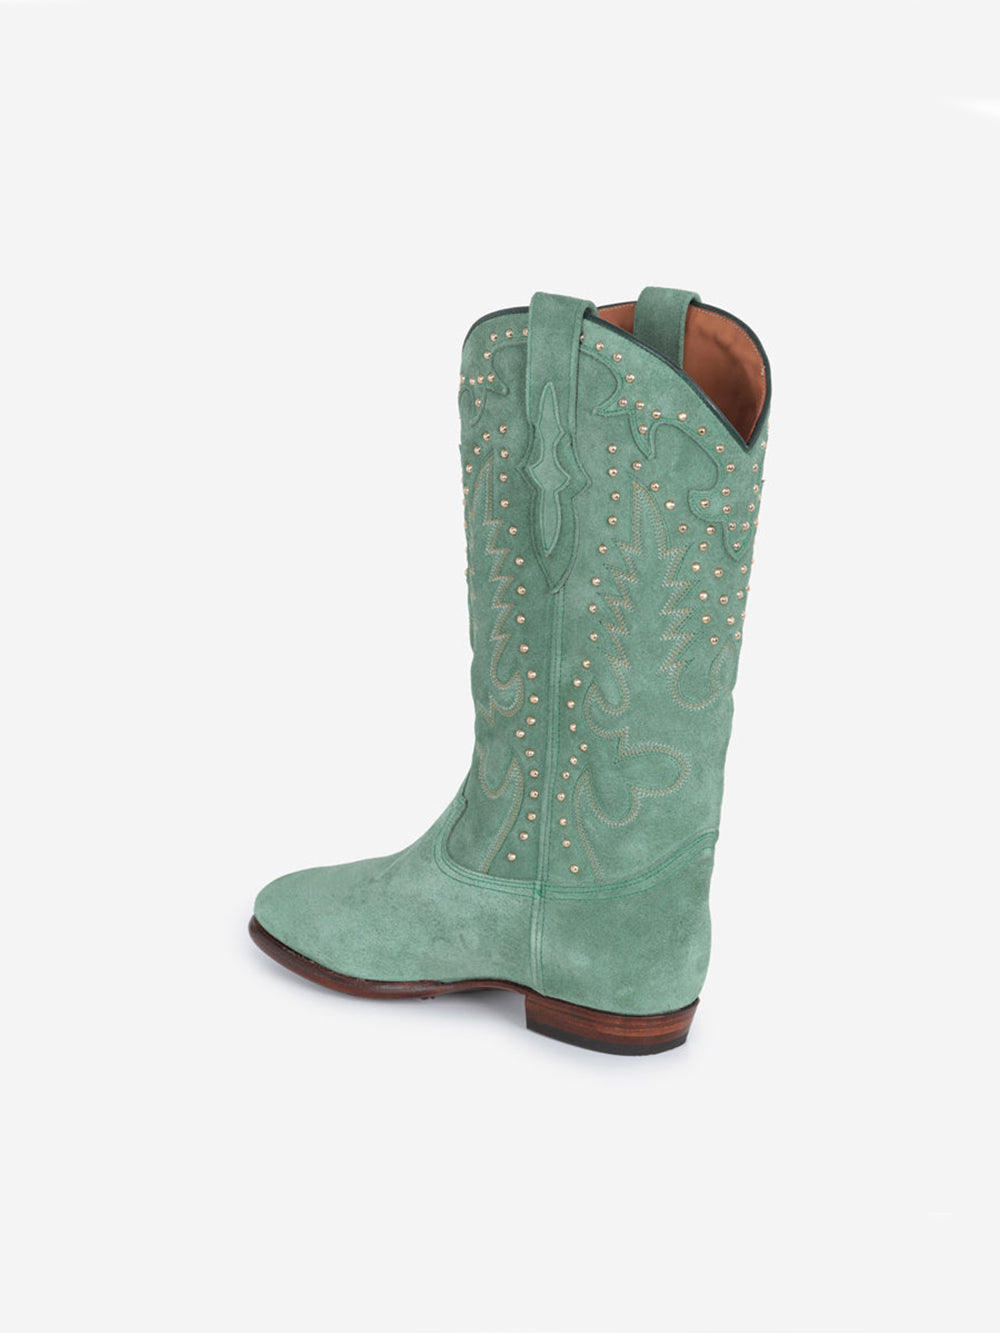 SANTIAG STUDS BOOTS IN MINT GREEN SUEDE